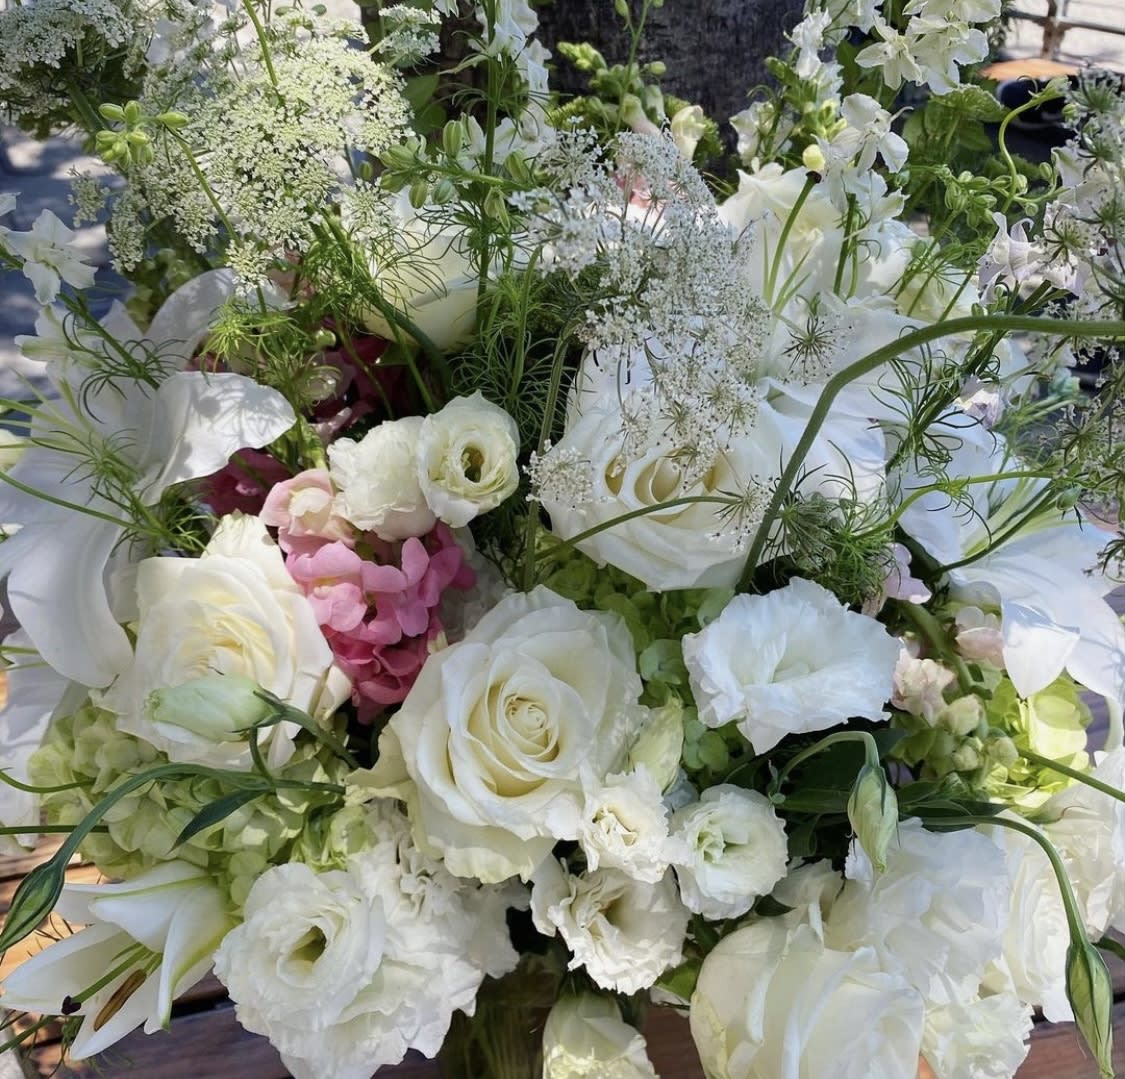 White with a Pop - This all white arrangement comes with a little pop of color featuring roses, lisianthus, snap dragons, lilies, hydrangea, Queen Anne’s lace and larkspur. Comes in a clear glass vase. 